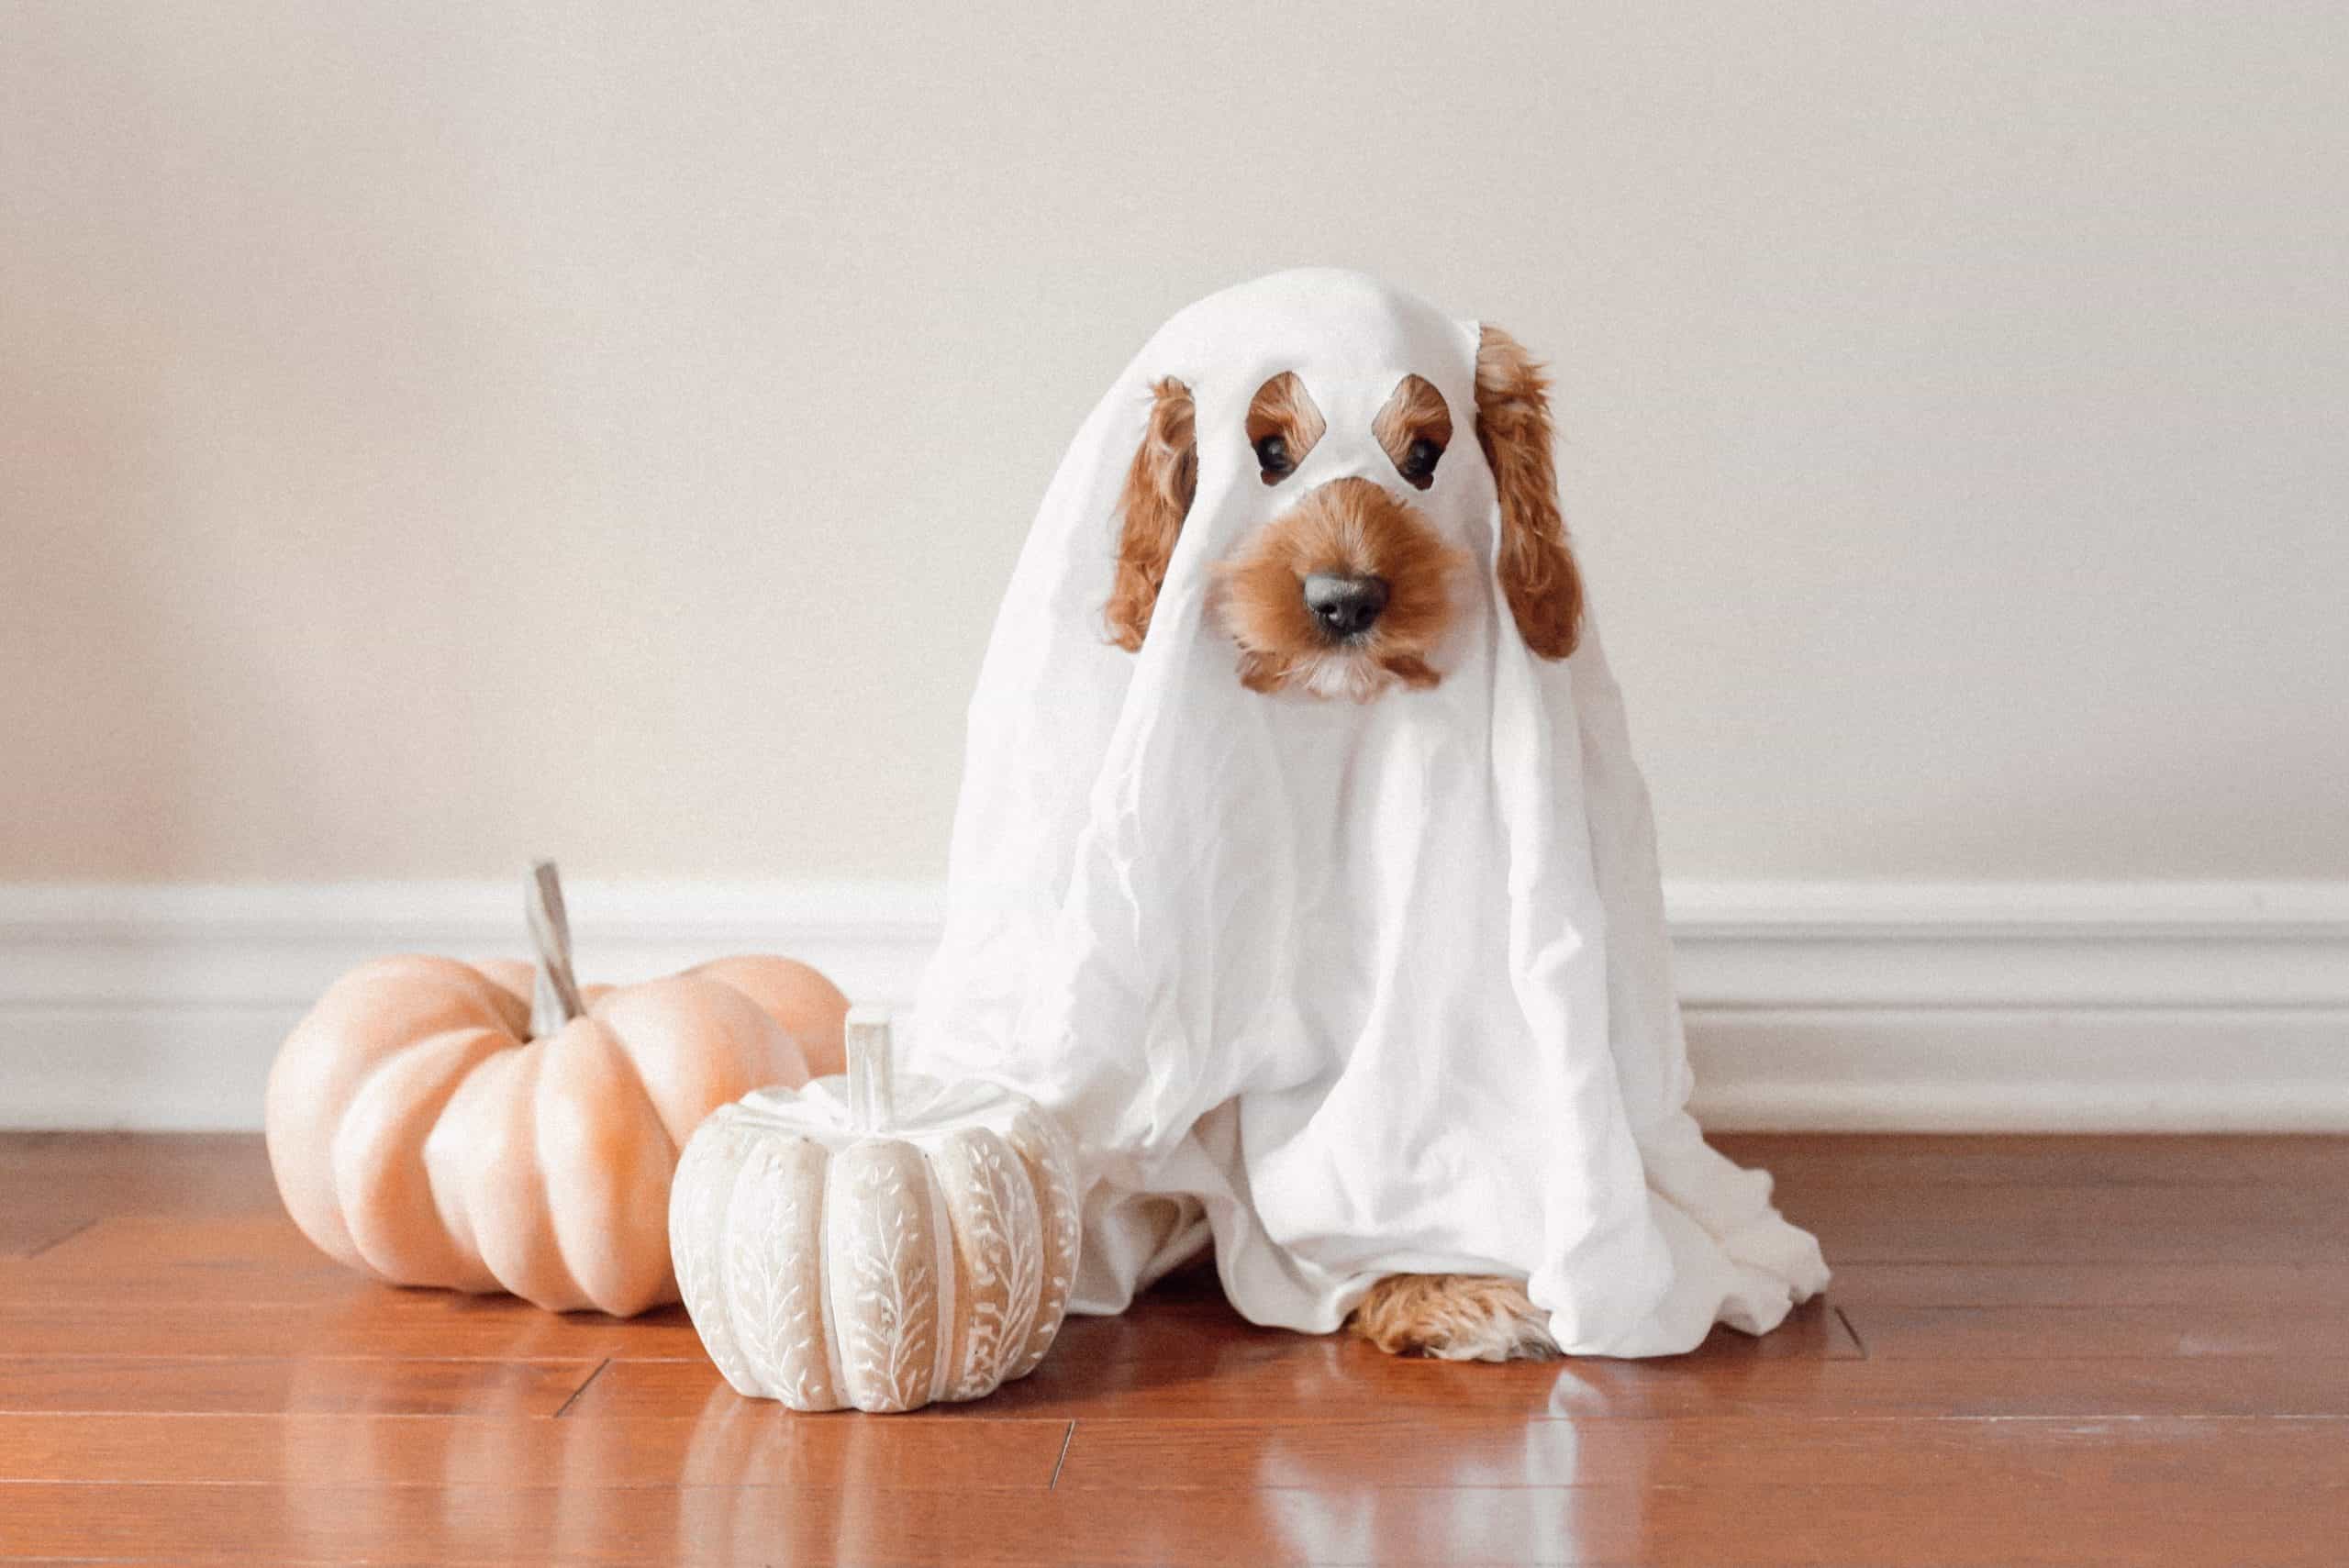 Dog in a ghost Halloween costume for pet safety during the Halloween season.